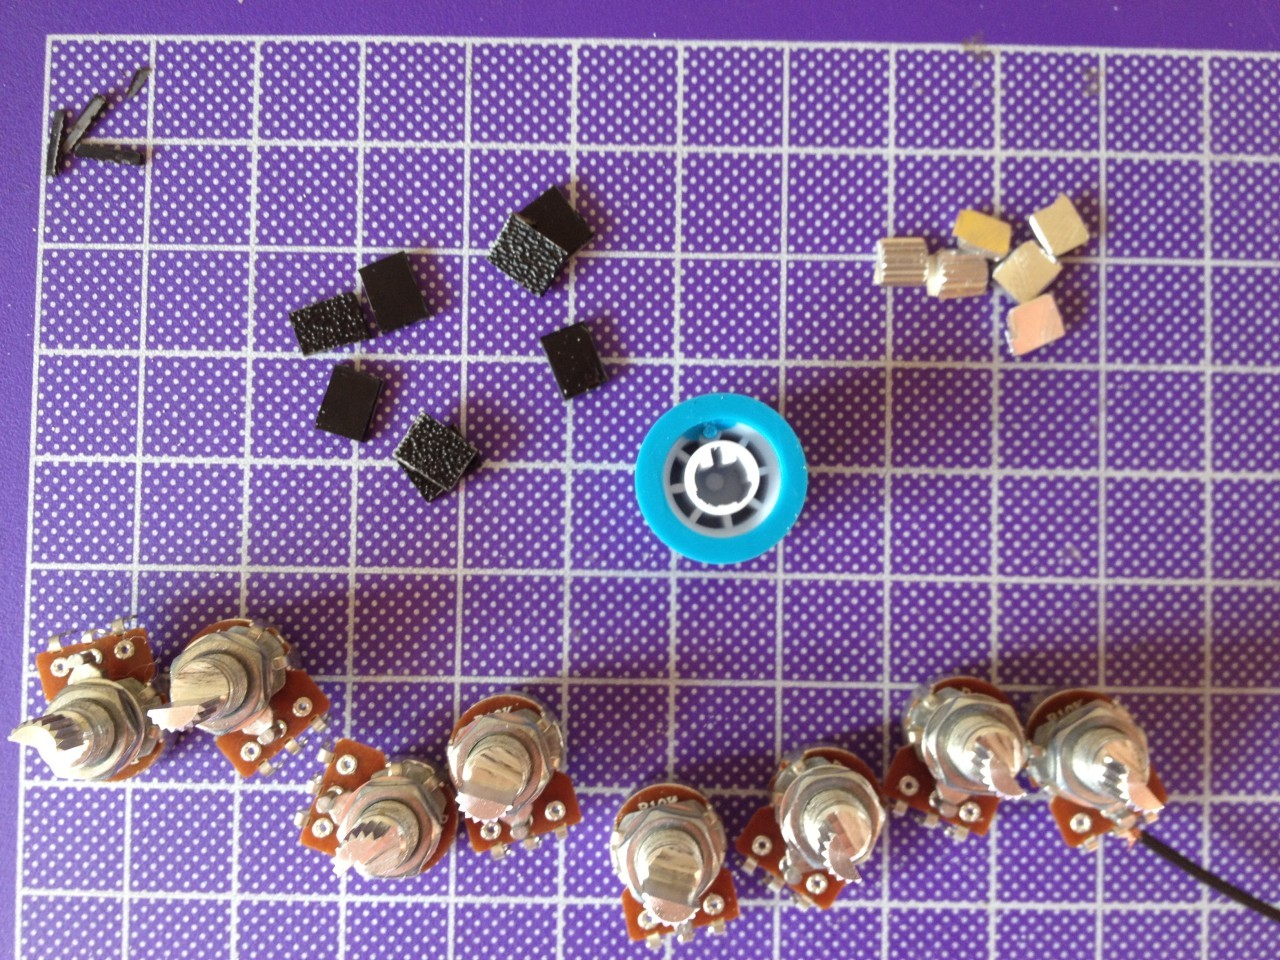 This shows how I cut off half of the shaft on the rotary potentiometers to fit the knobs. The black plastic scraps were glued with epoxy to the posts to fill out the D shape, and they fit snugly into the knobs.